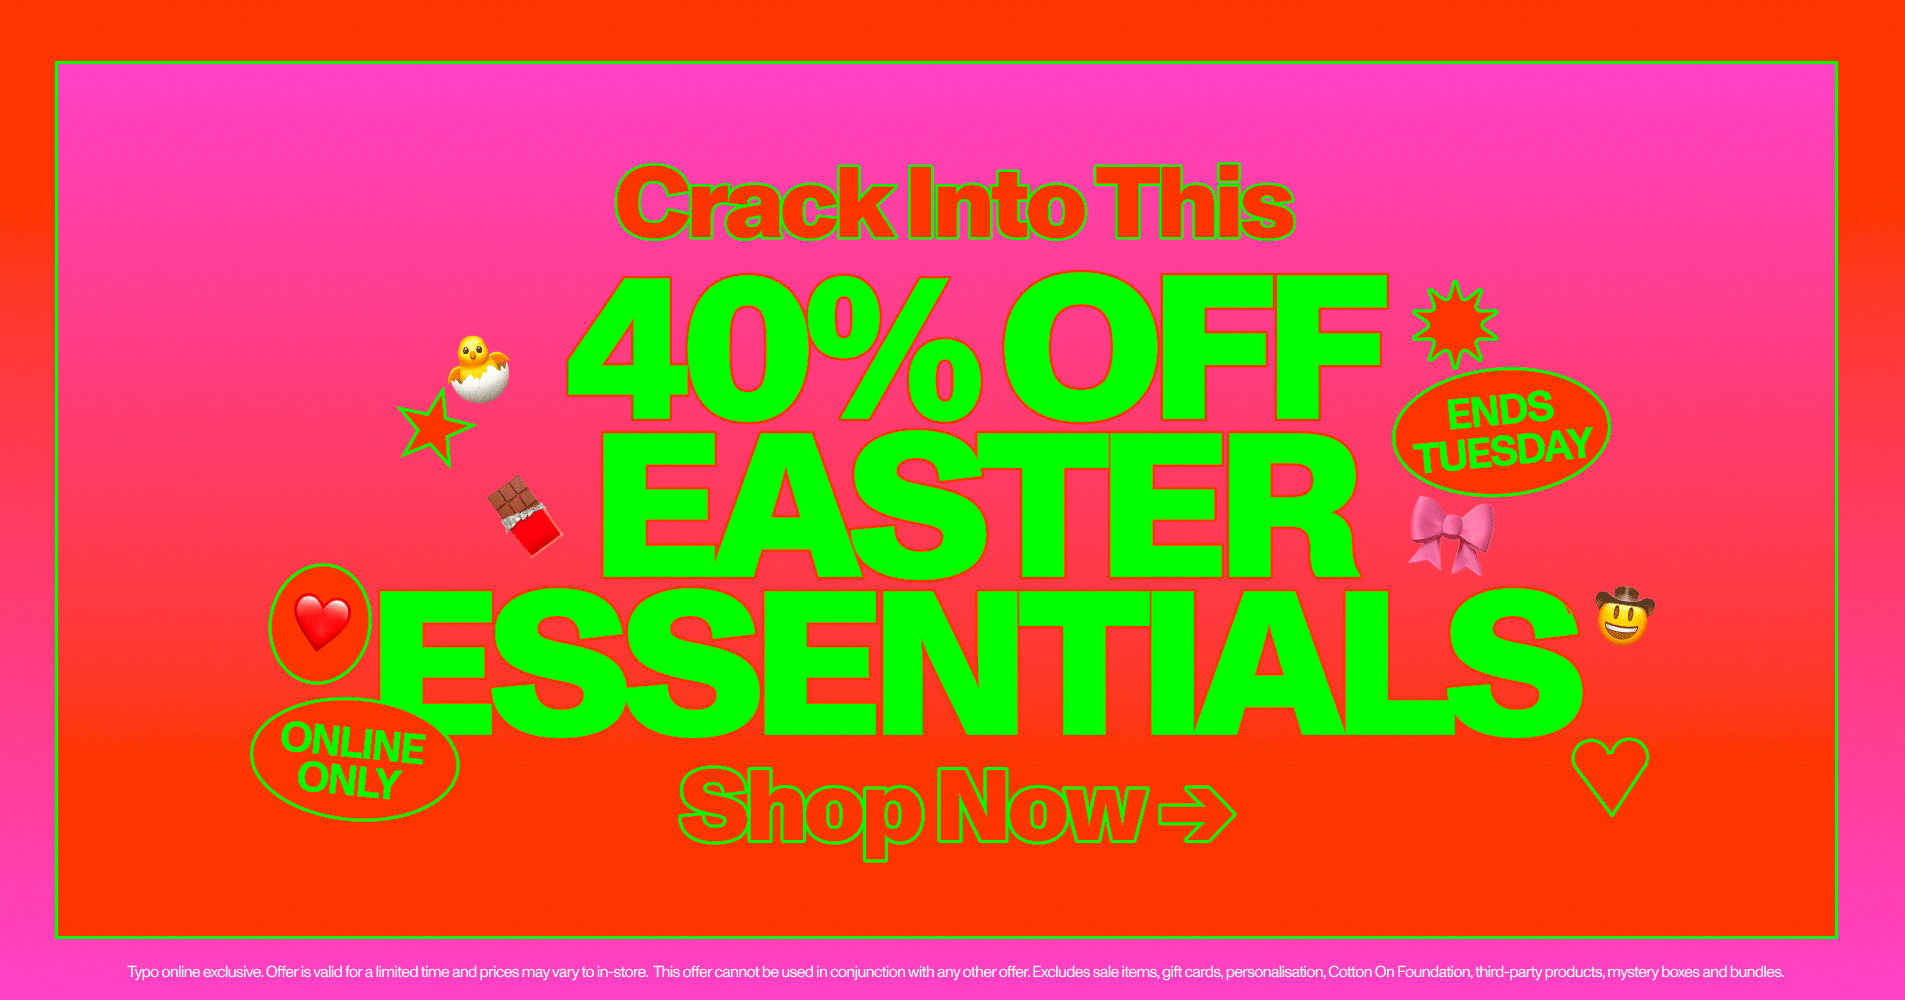 Crack Into This. 40% off Easter Essentials. Shop Now. Limited Time Only.